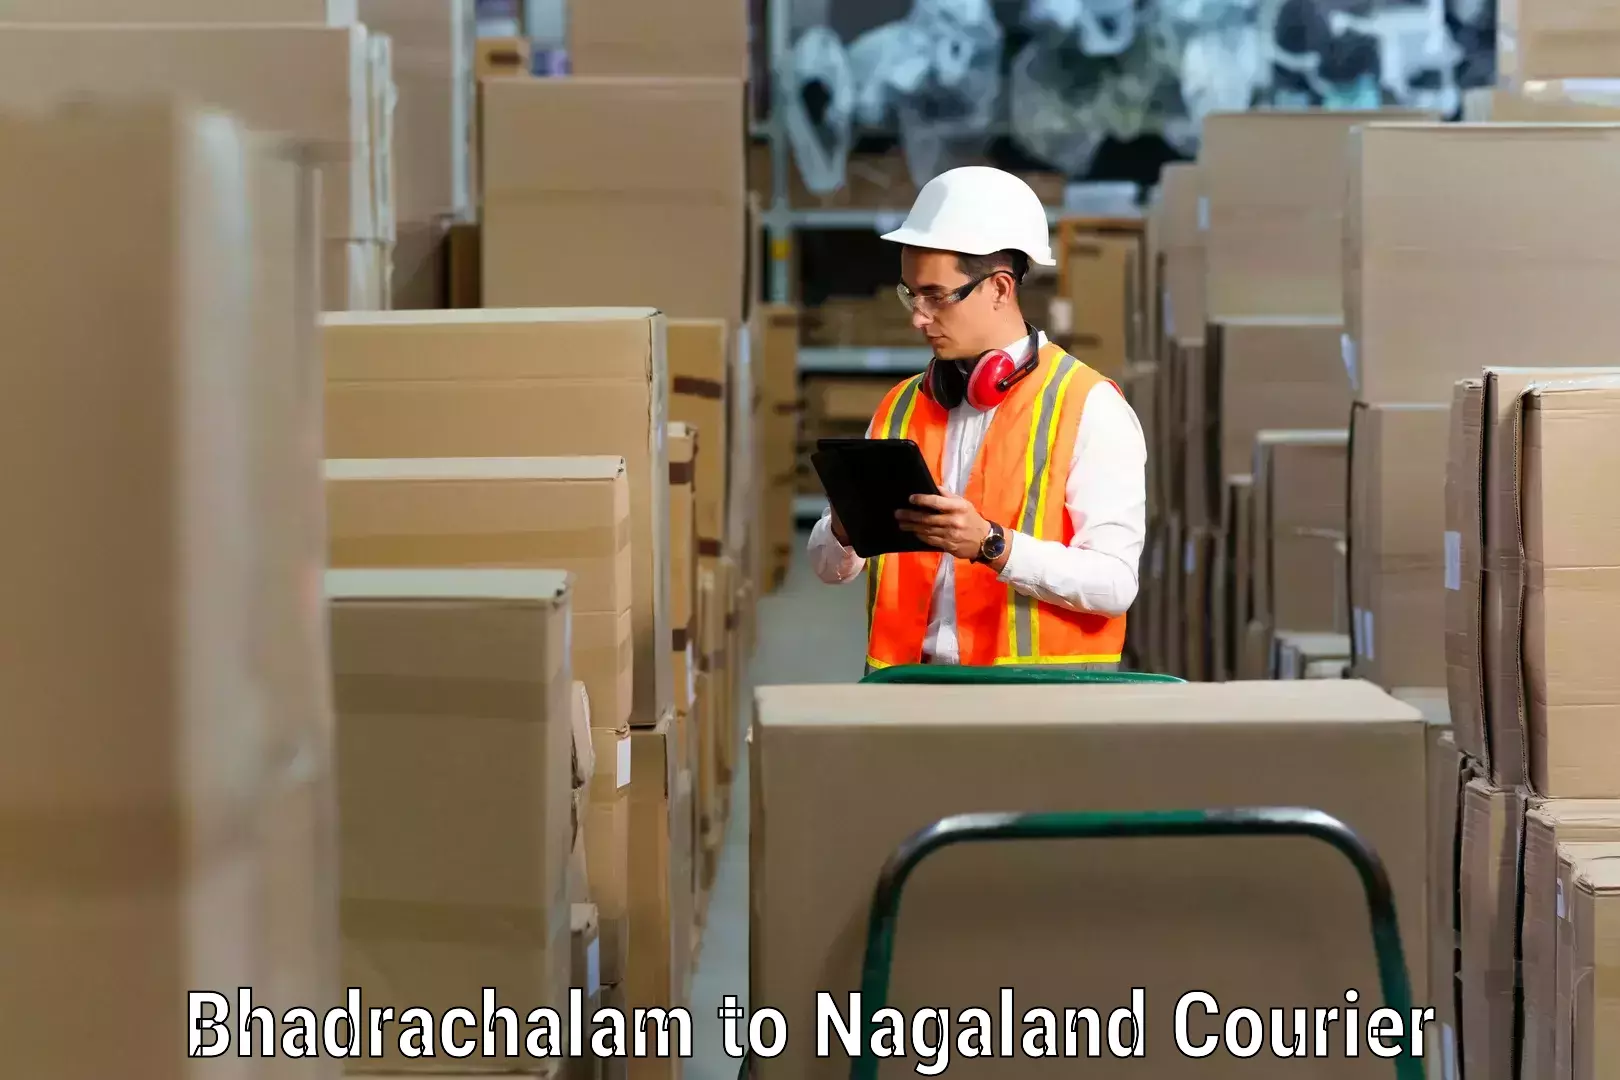 Quality relocation assistance in Bhadrachalam to Dimapur